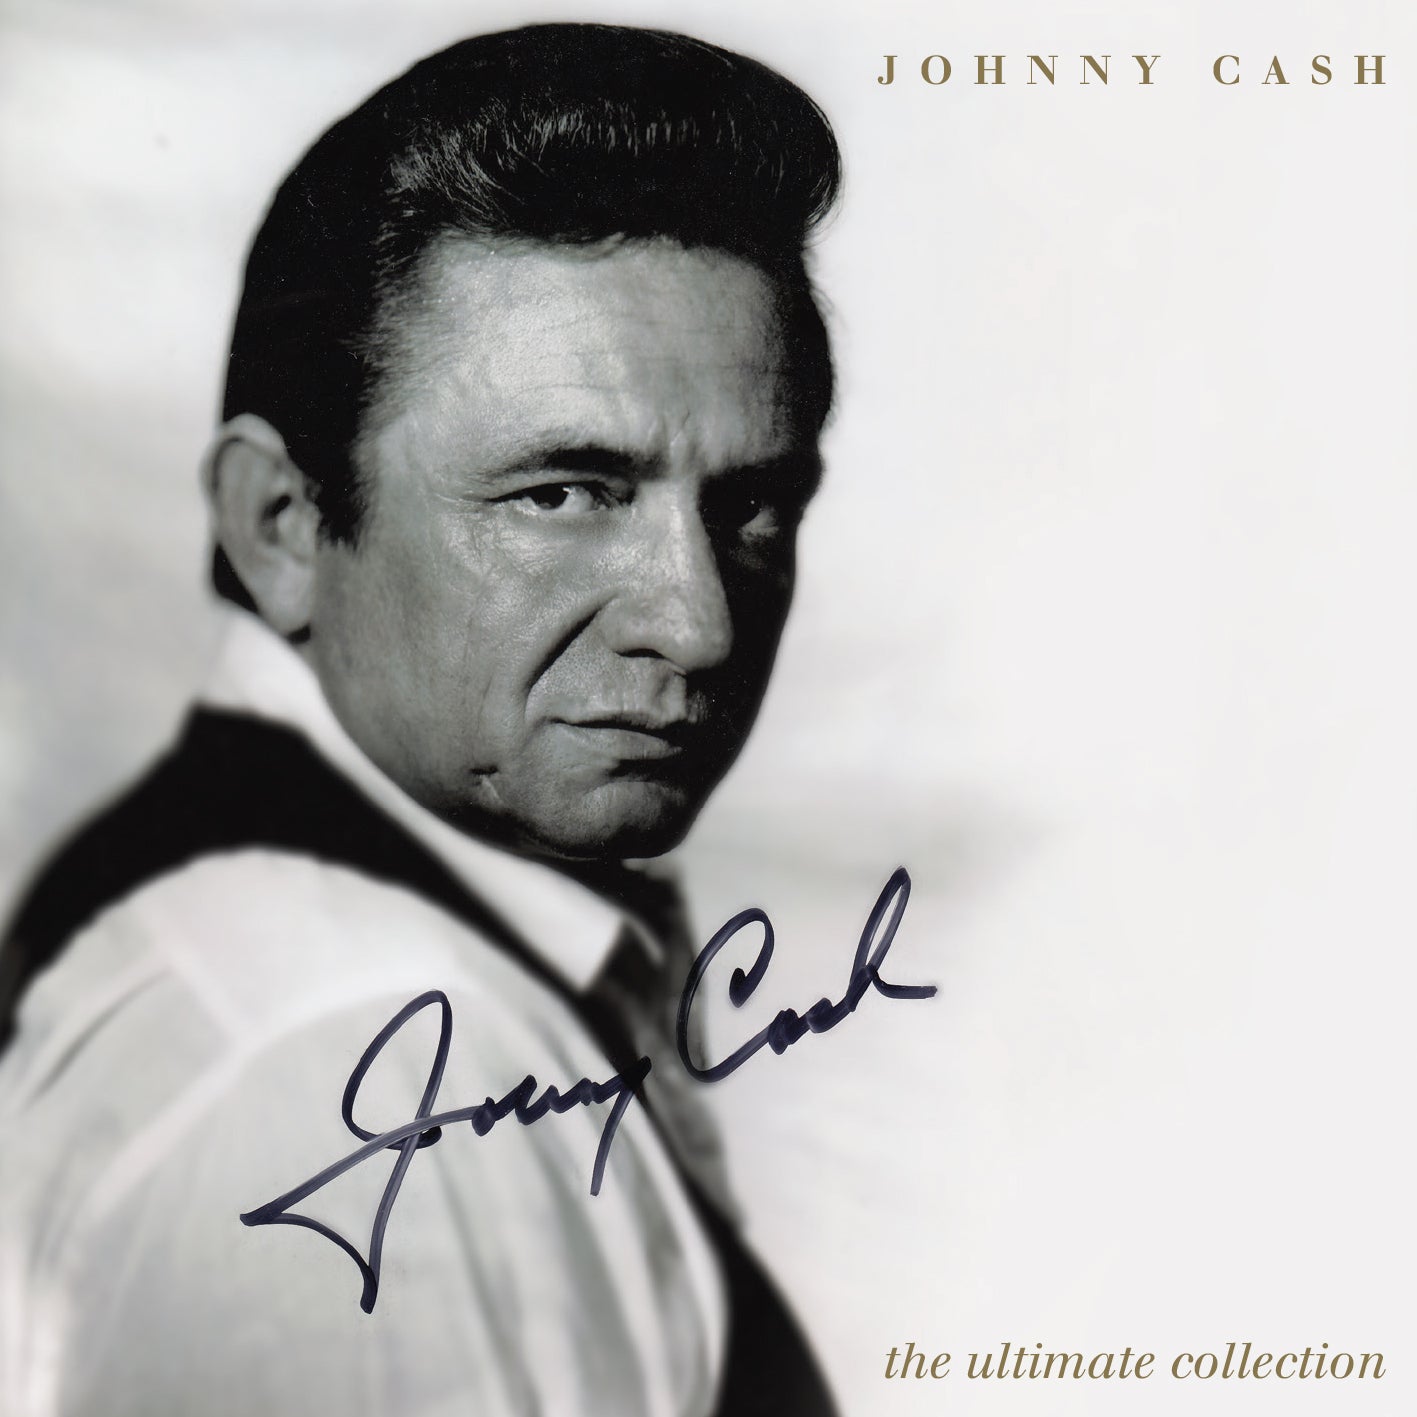 JOHNNY CASH - THE ULTIMATE COLLECTION